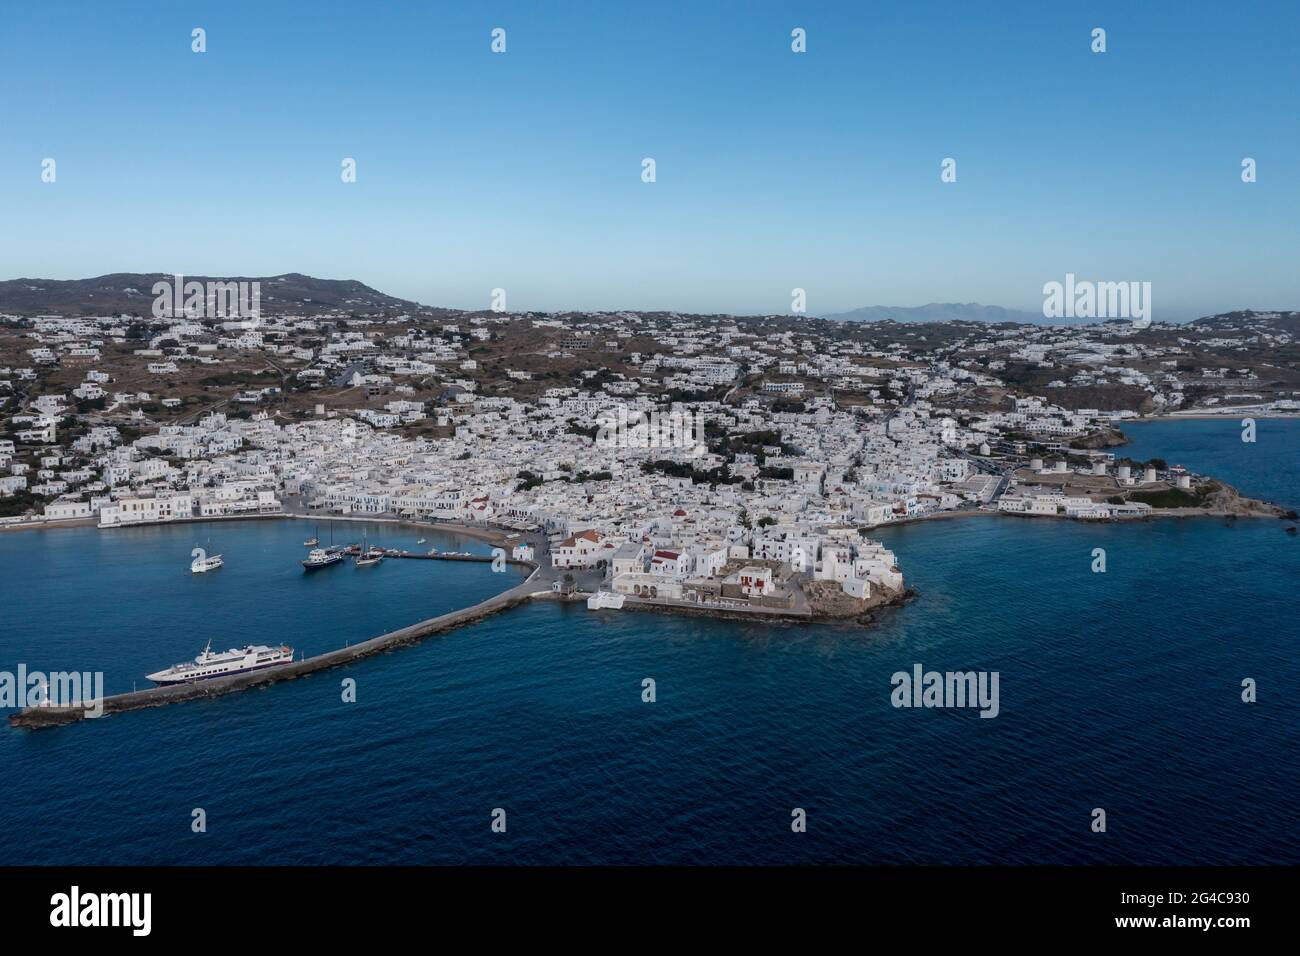 Greece, Mykonos island, Cyclades. Aerial drone view. Mikonos coastline, Chora whitewashed buildings cityscape, port, Little Venice and traditional win Stock Photo